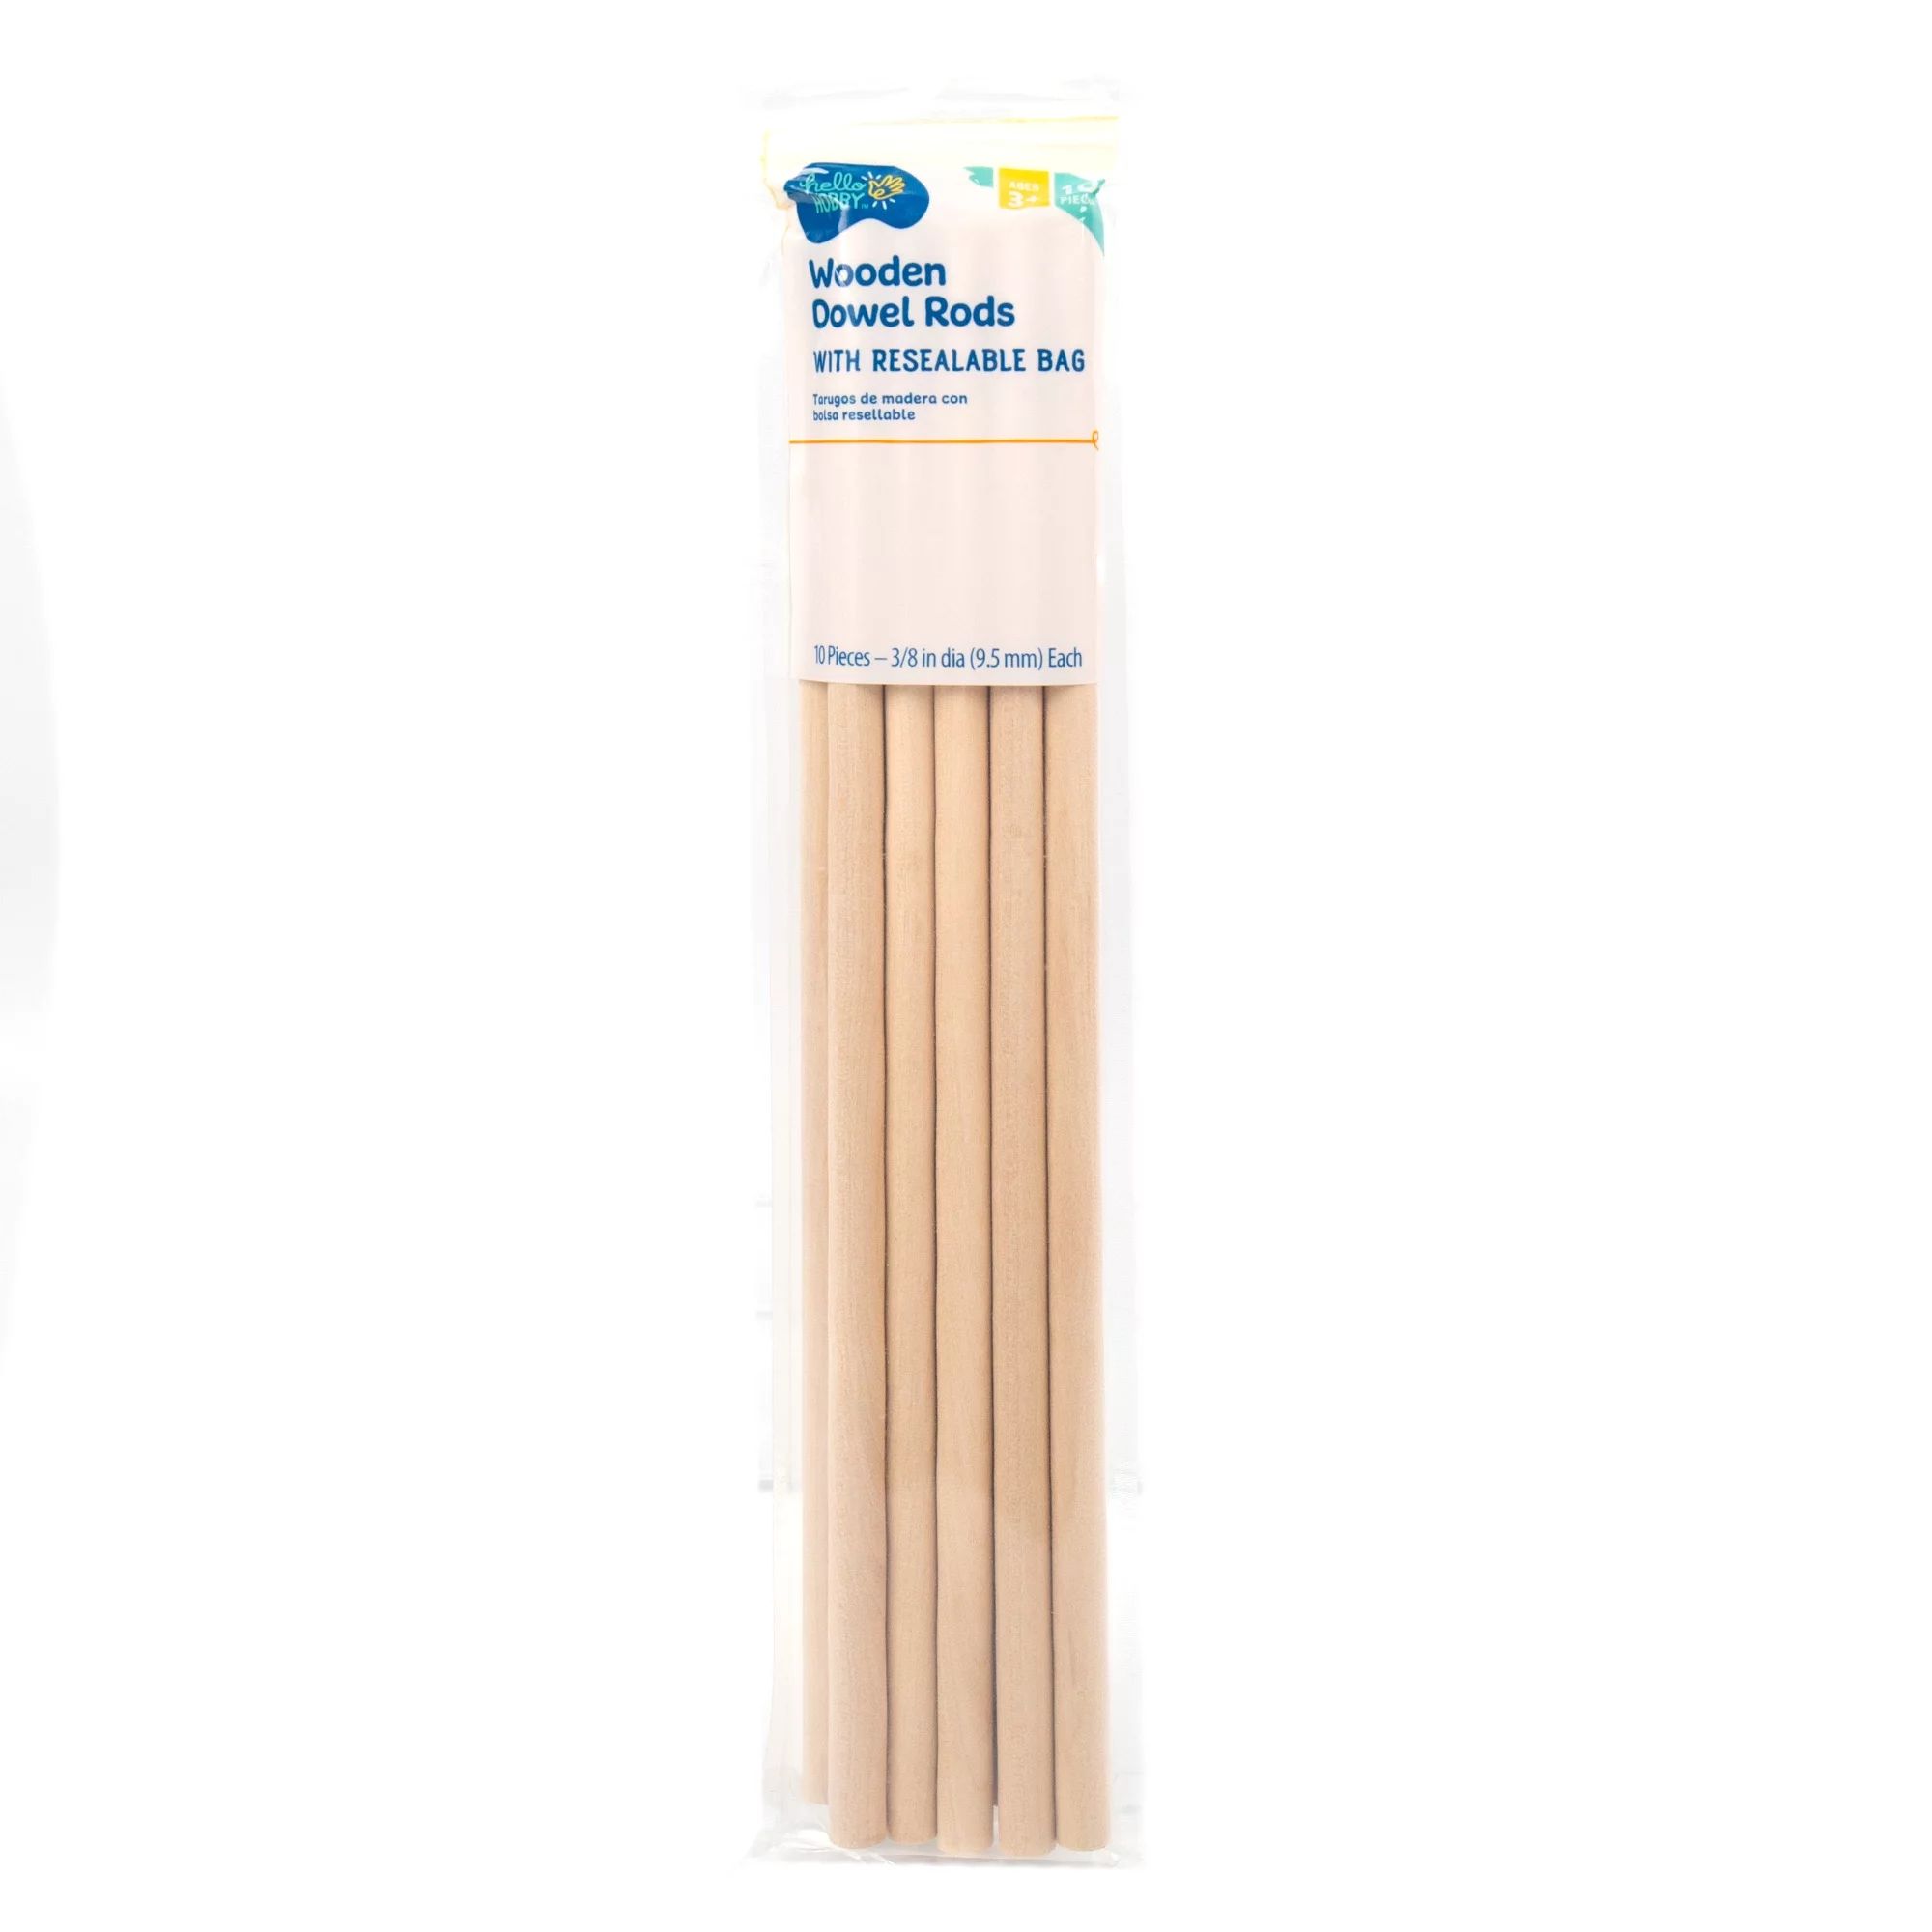 Hello Hobby Wood Dowels 3/8" with Resealable Bag, 10-Pack | Walmart (US)